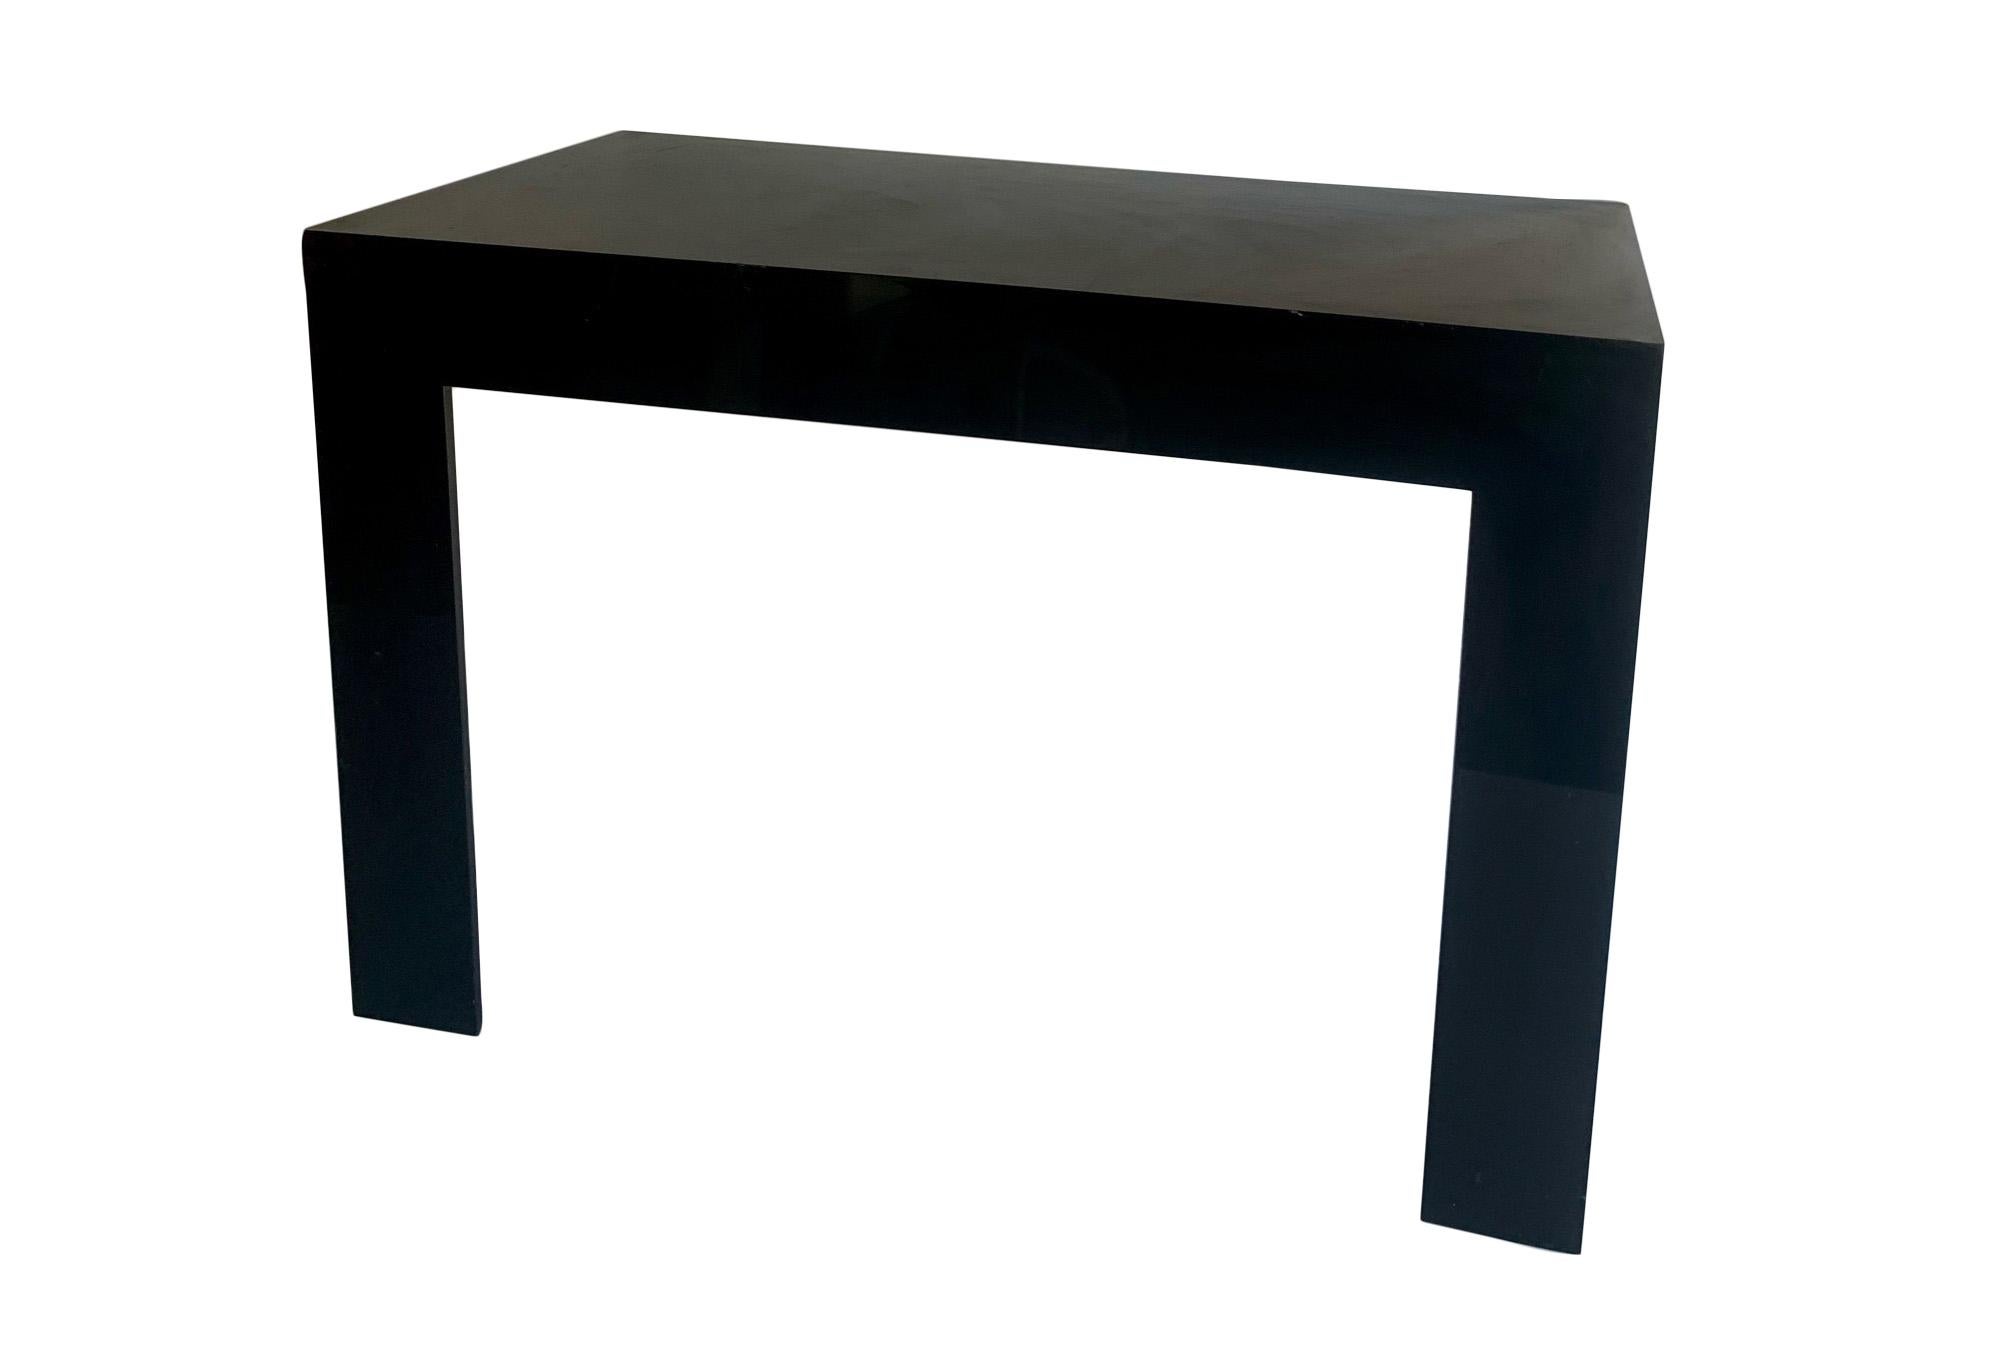 Vintage circa 1970s Syroco ABS molded 450plastic wall-mount end or side table in shiny black. Versatile console style that is great for shallow spaces next to a bed or chair -- it must be flush against a wall, obviously, to stand up. There are two